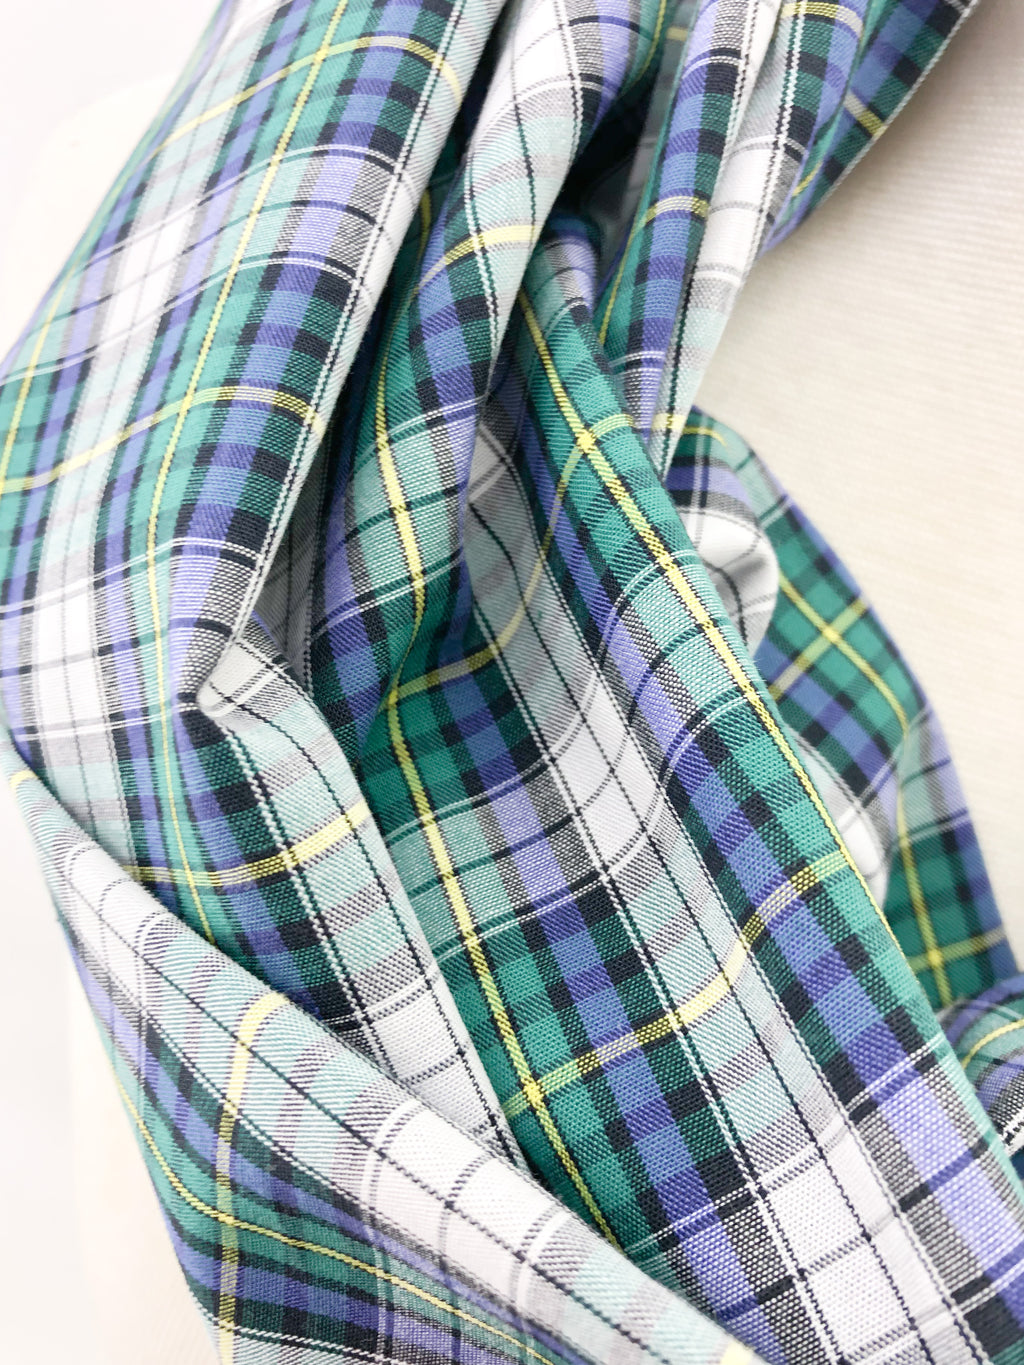 Summer Classic Plaid Eternity Scarf with a Leather Cuff